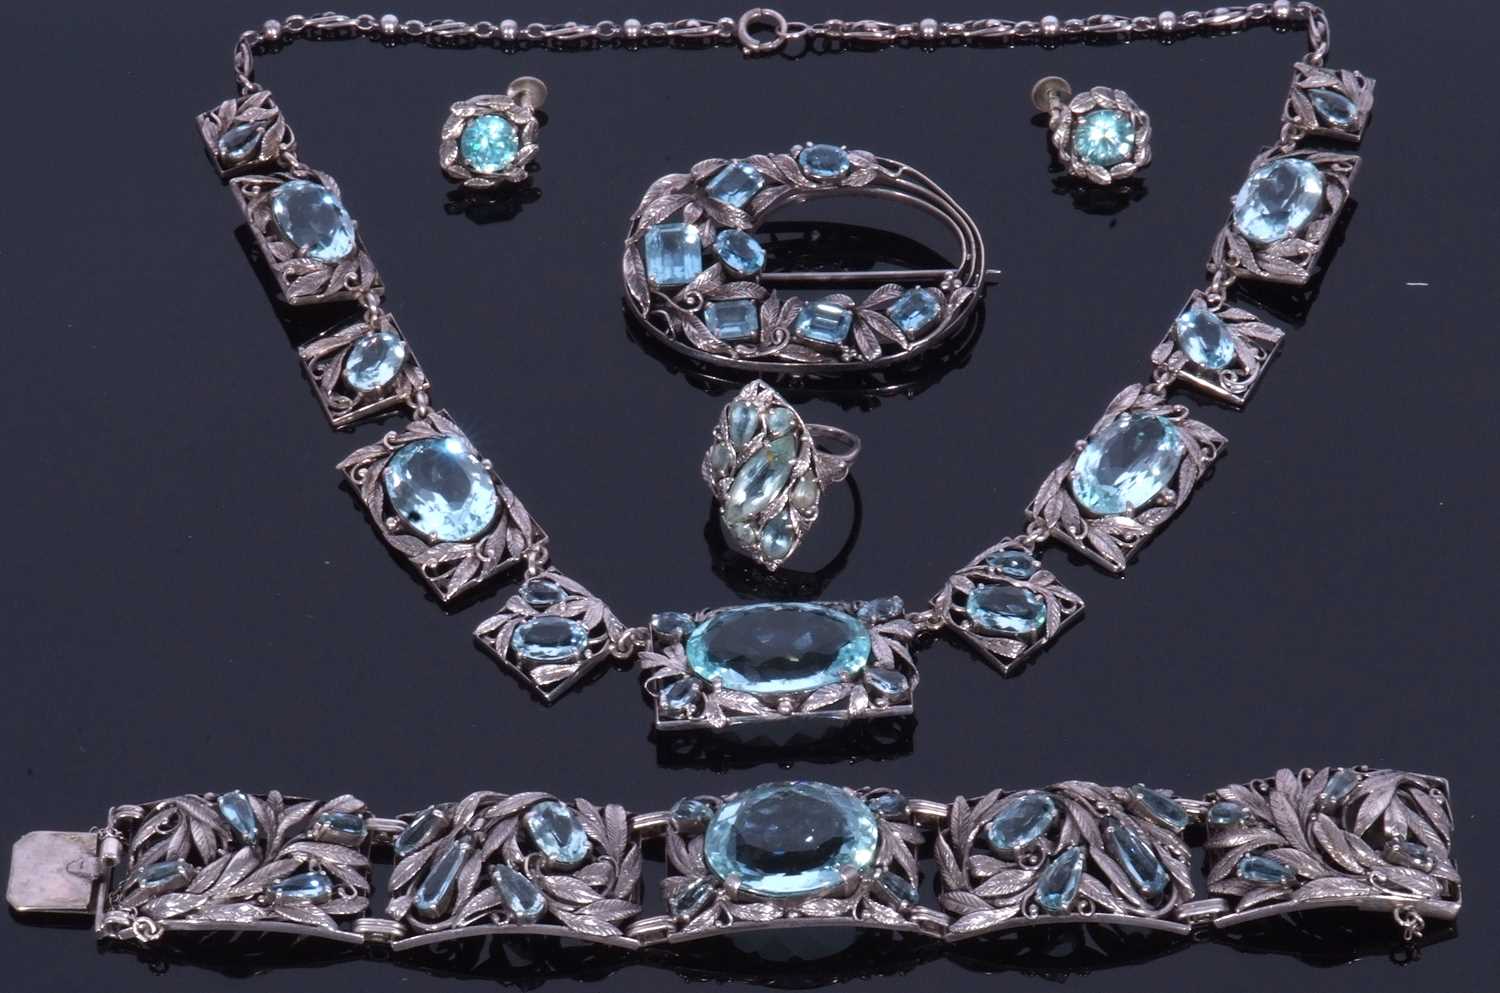 Attributed to Sybil Dunlop, Arts & Crafts demi-parure to include necklace, an alternate - Image 21 of 29